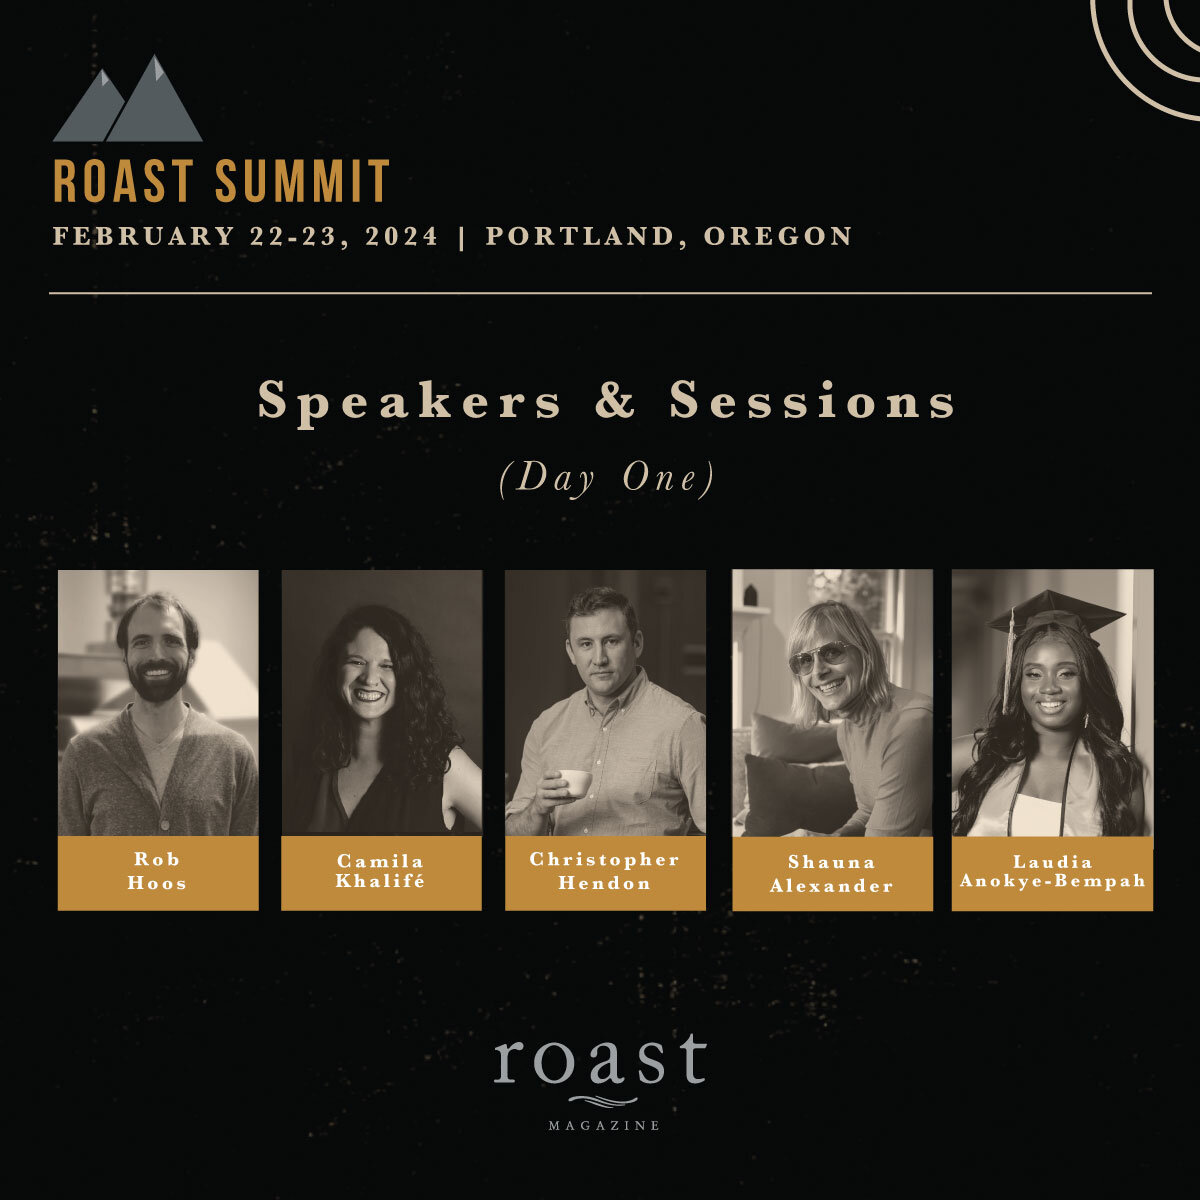 Join us in Portland, Oregon, on February 22-23, 2024, for our sixth Roast Summit event! We will convene at two remarkable venues: the historic McMenamins Kennedy School and the innovative Buckman Coffee Factory.

☕ Day One | Presentations | 9:00 a.m.